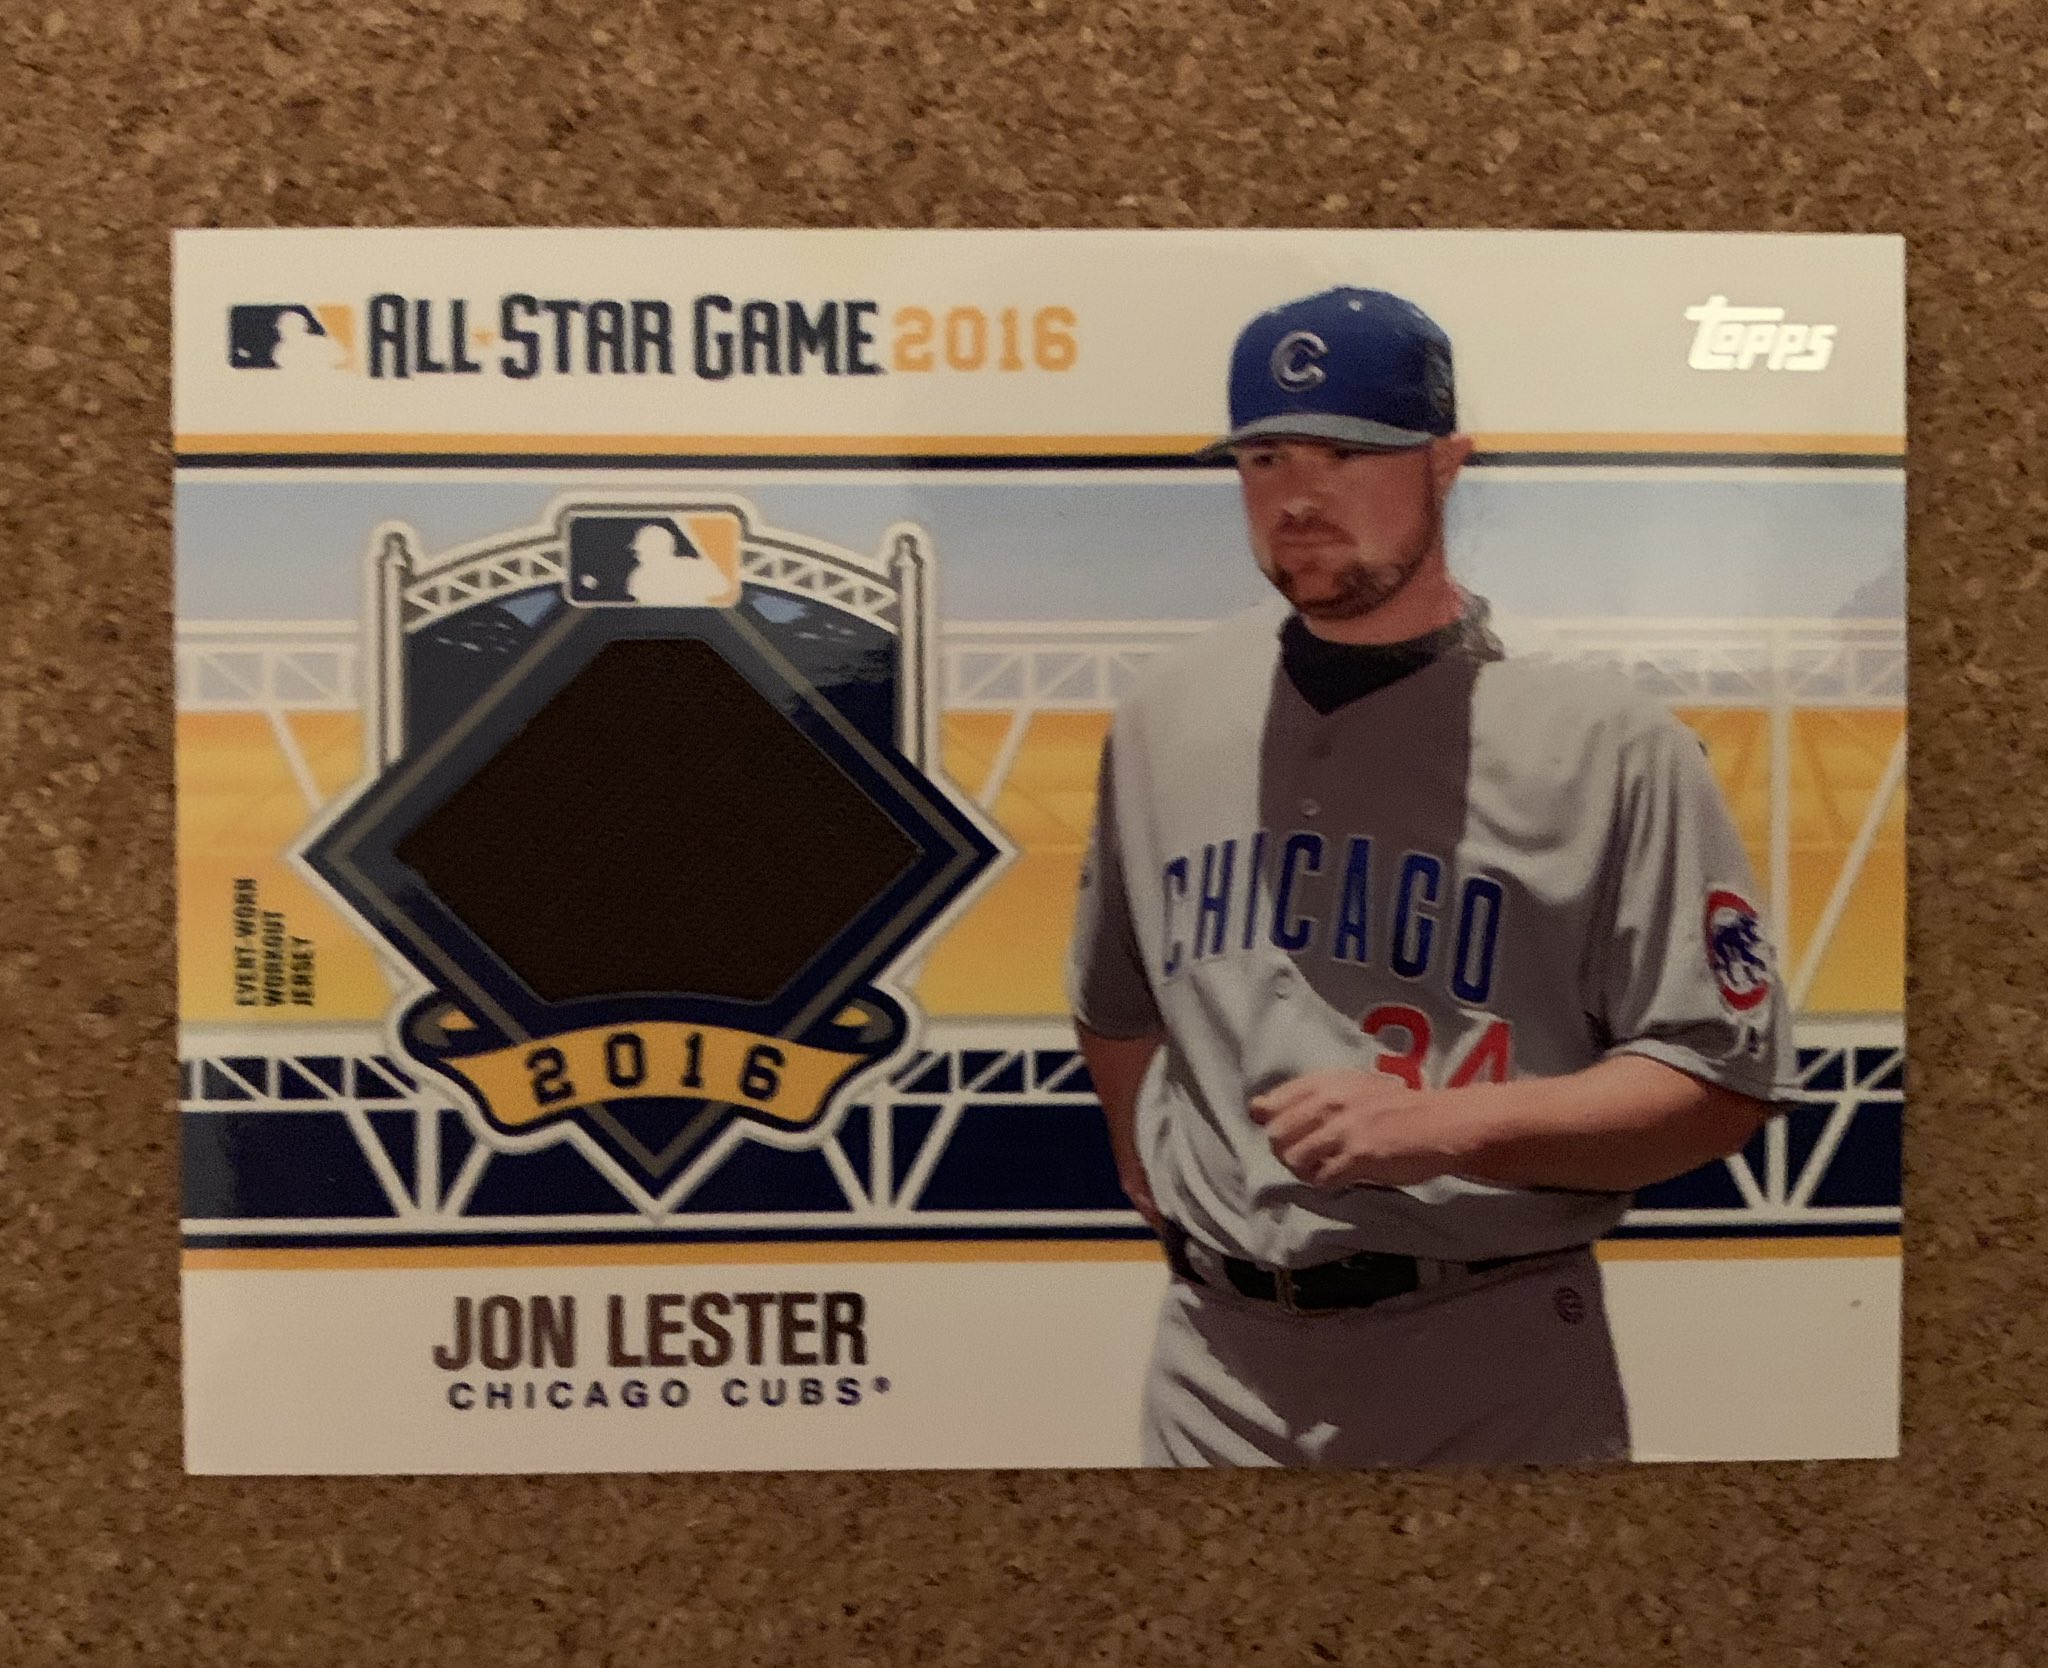   2016 Topps Jon Lester All-Star Game jersey card  

Happy 35th birthday,  